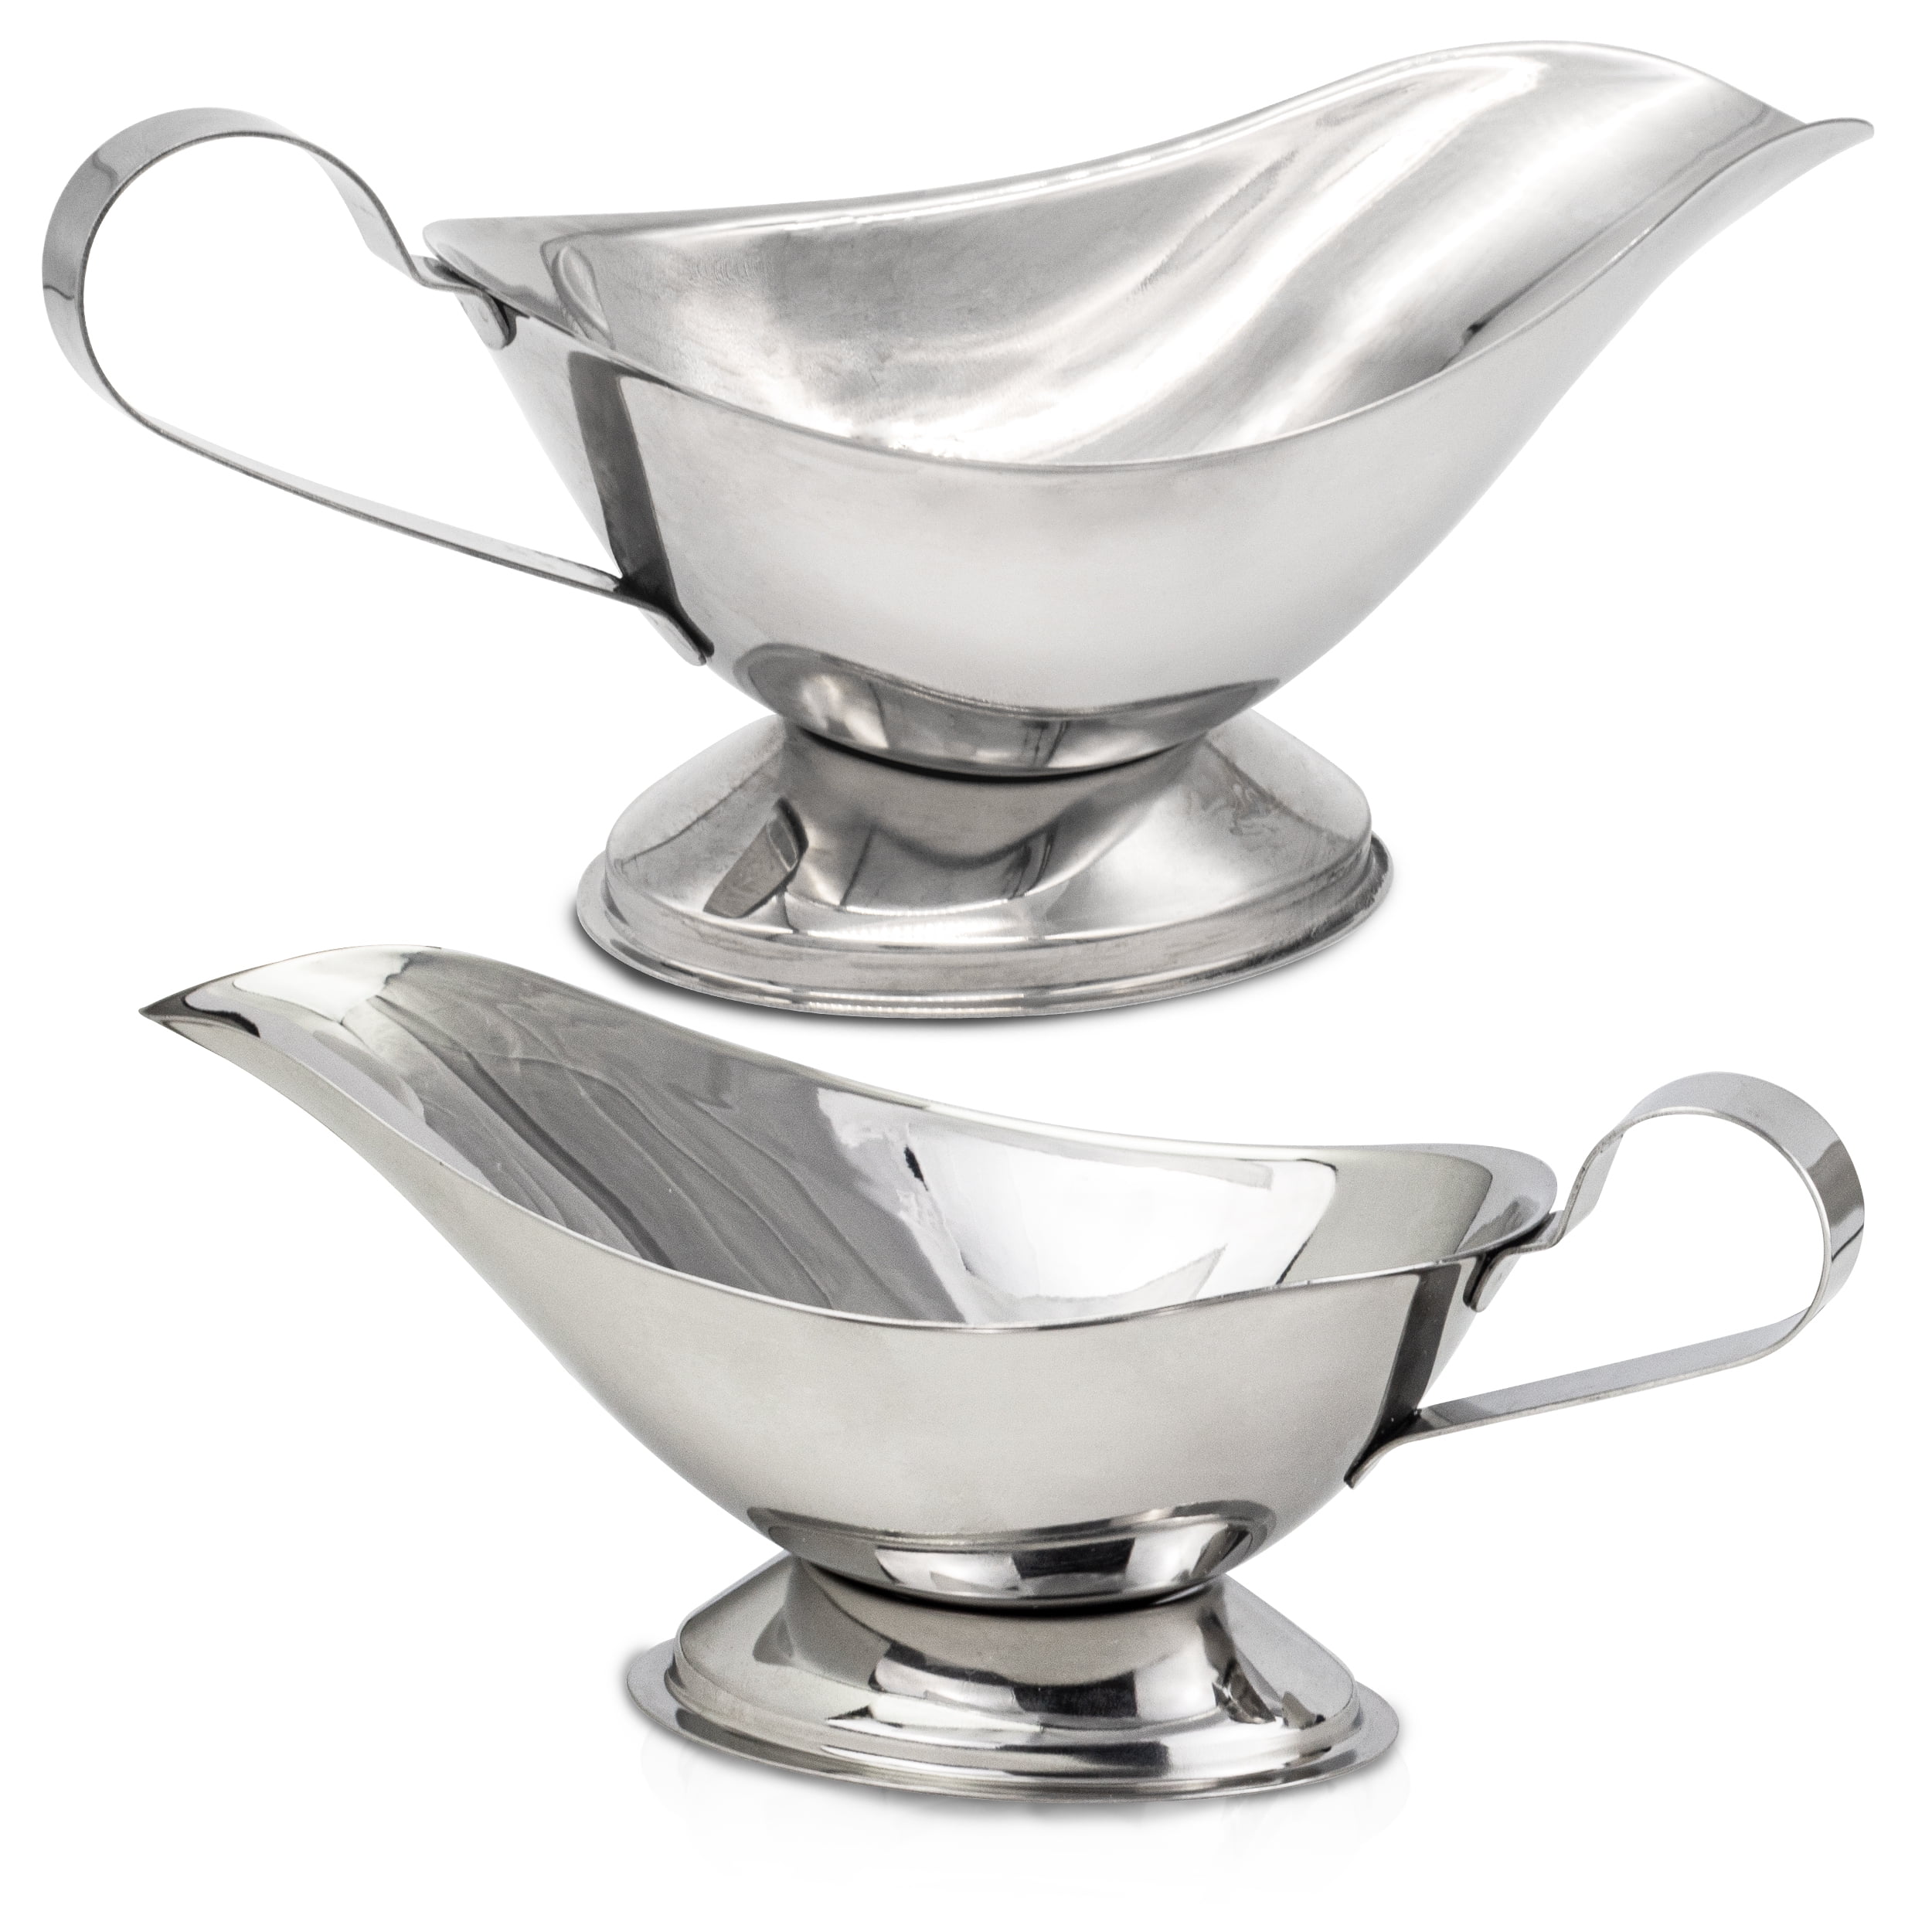 Gravy Boats-GBS-10 Stainless Winco GBS-10 10-Oz Gravy Boat 